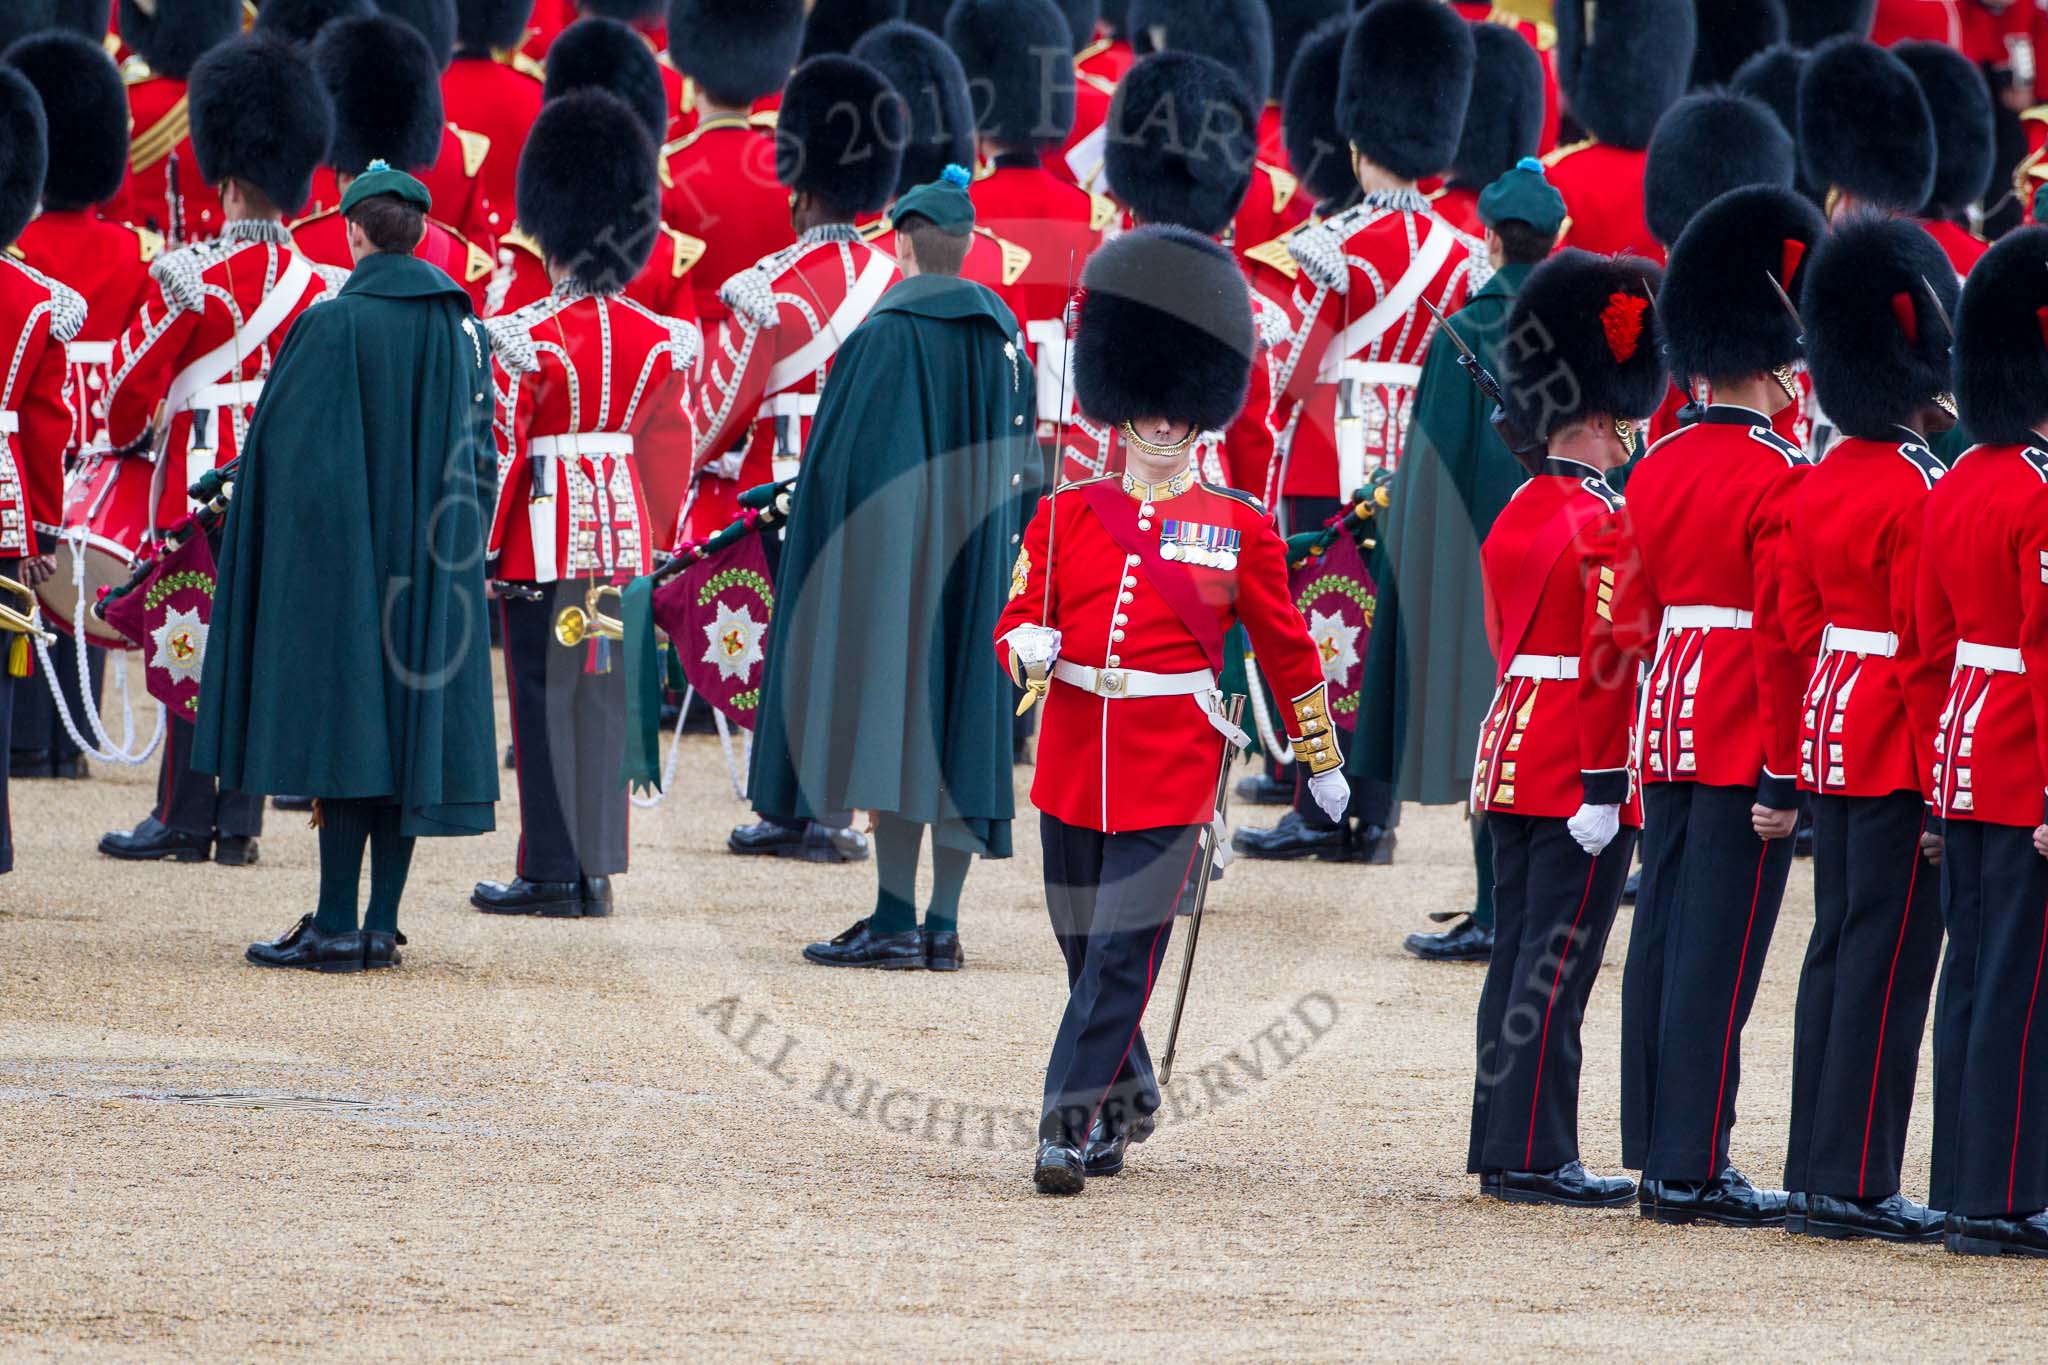 Trooping the Colour 2012: The Regimental Sergeant Major, with his sword still drawn, moves back to his original position..
Horse Guards Parade, Westminster,
London SW1,

United Kingdom,
on 16 June 2012 at 11:22, image #320